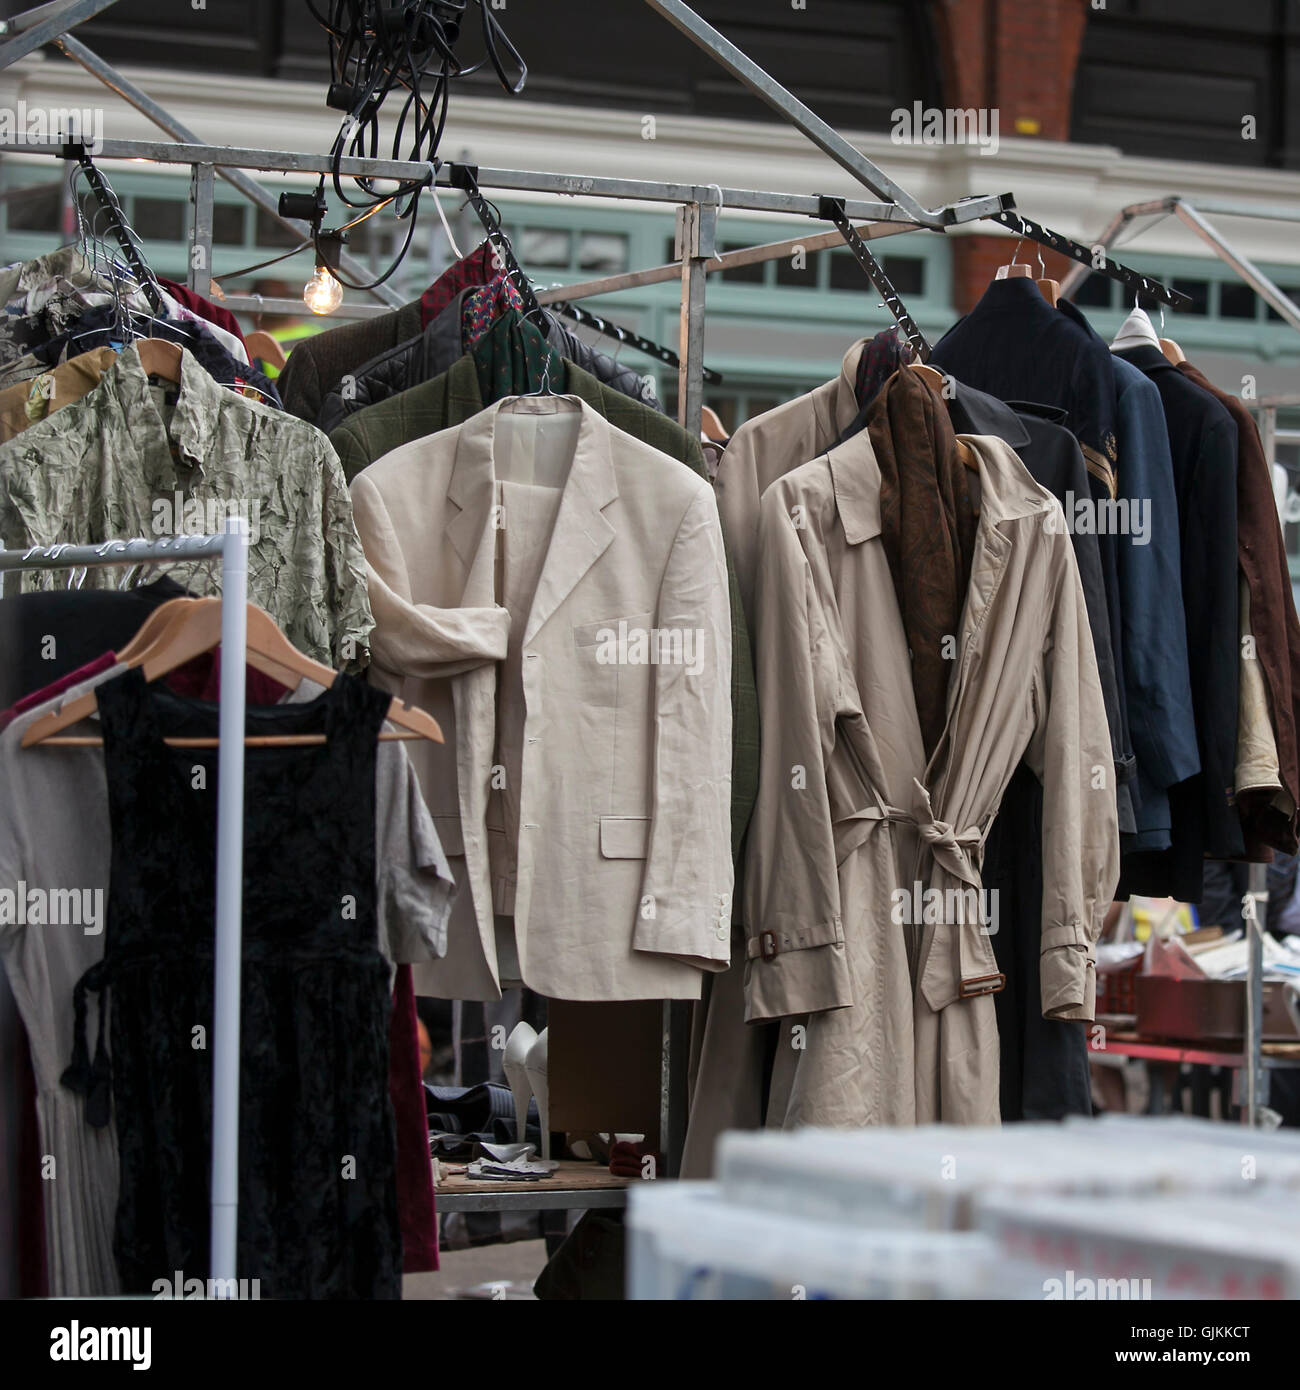 Spitalfields Antic Market. vintage outerwear, coats hanging on a rack Stock Photo